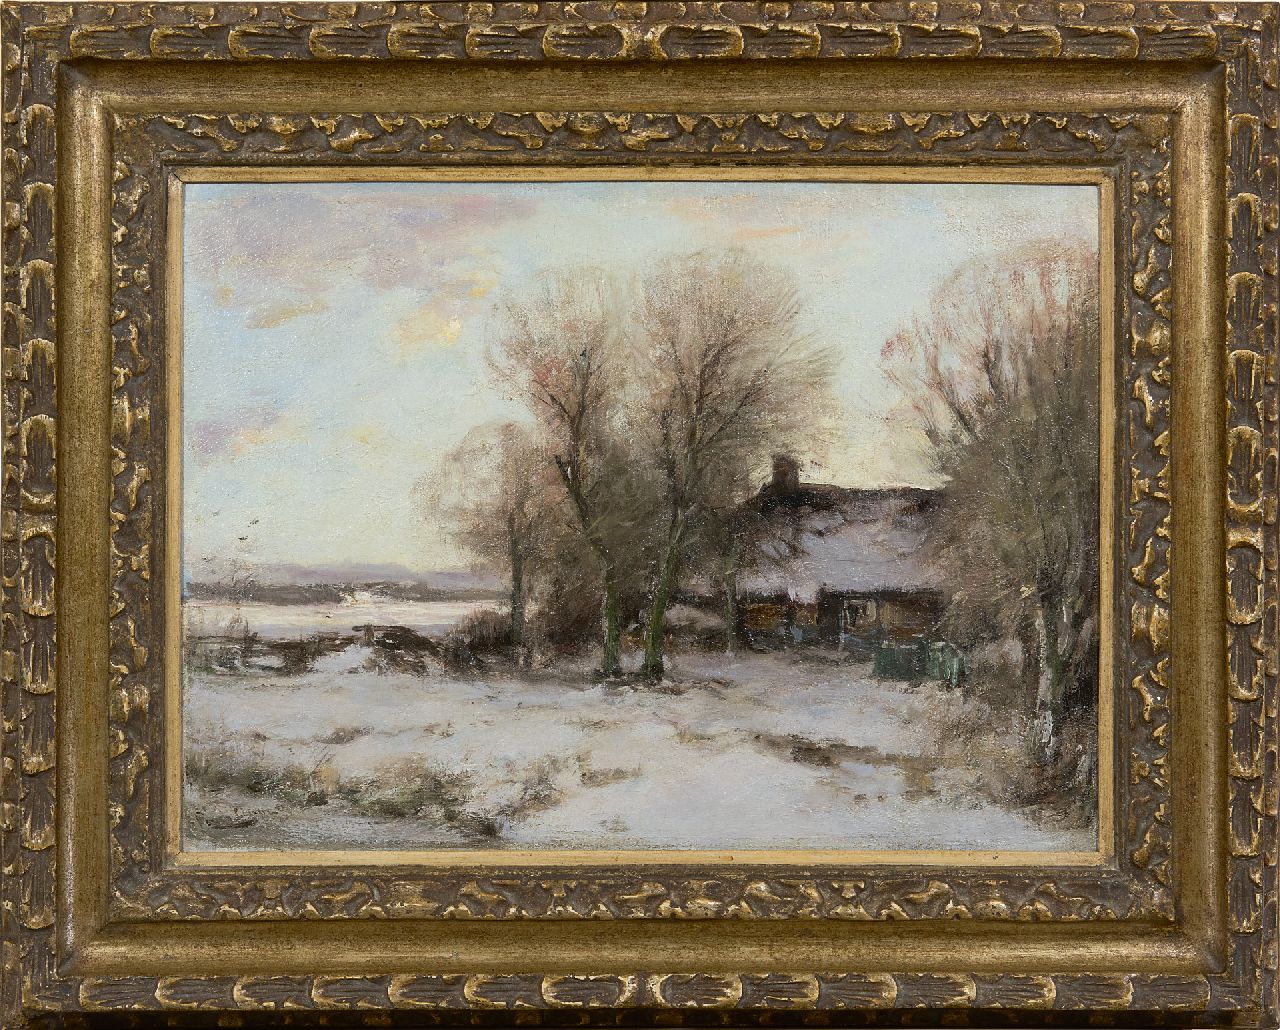 Louis Apol | Paintings for Sale | Farmhouse in a snowy landscape